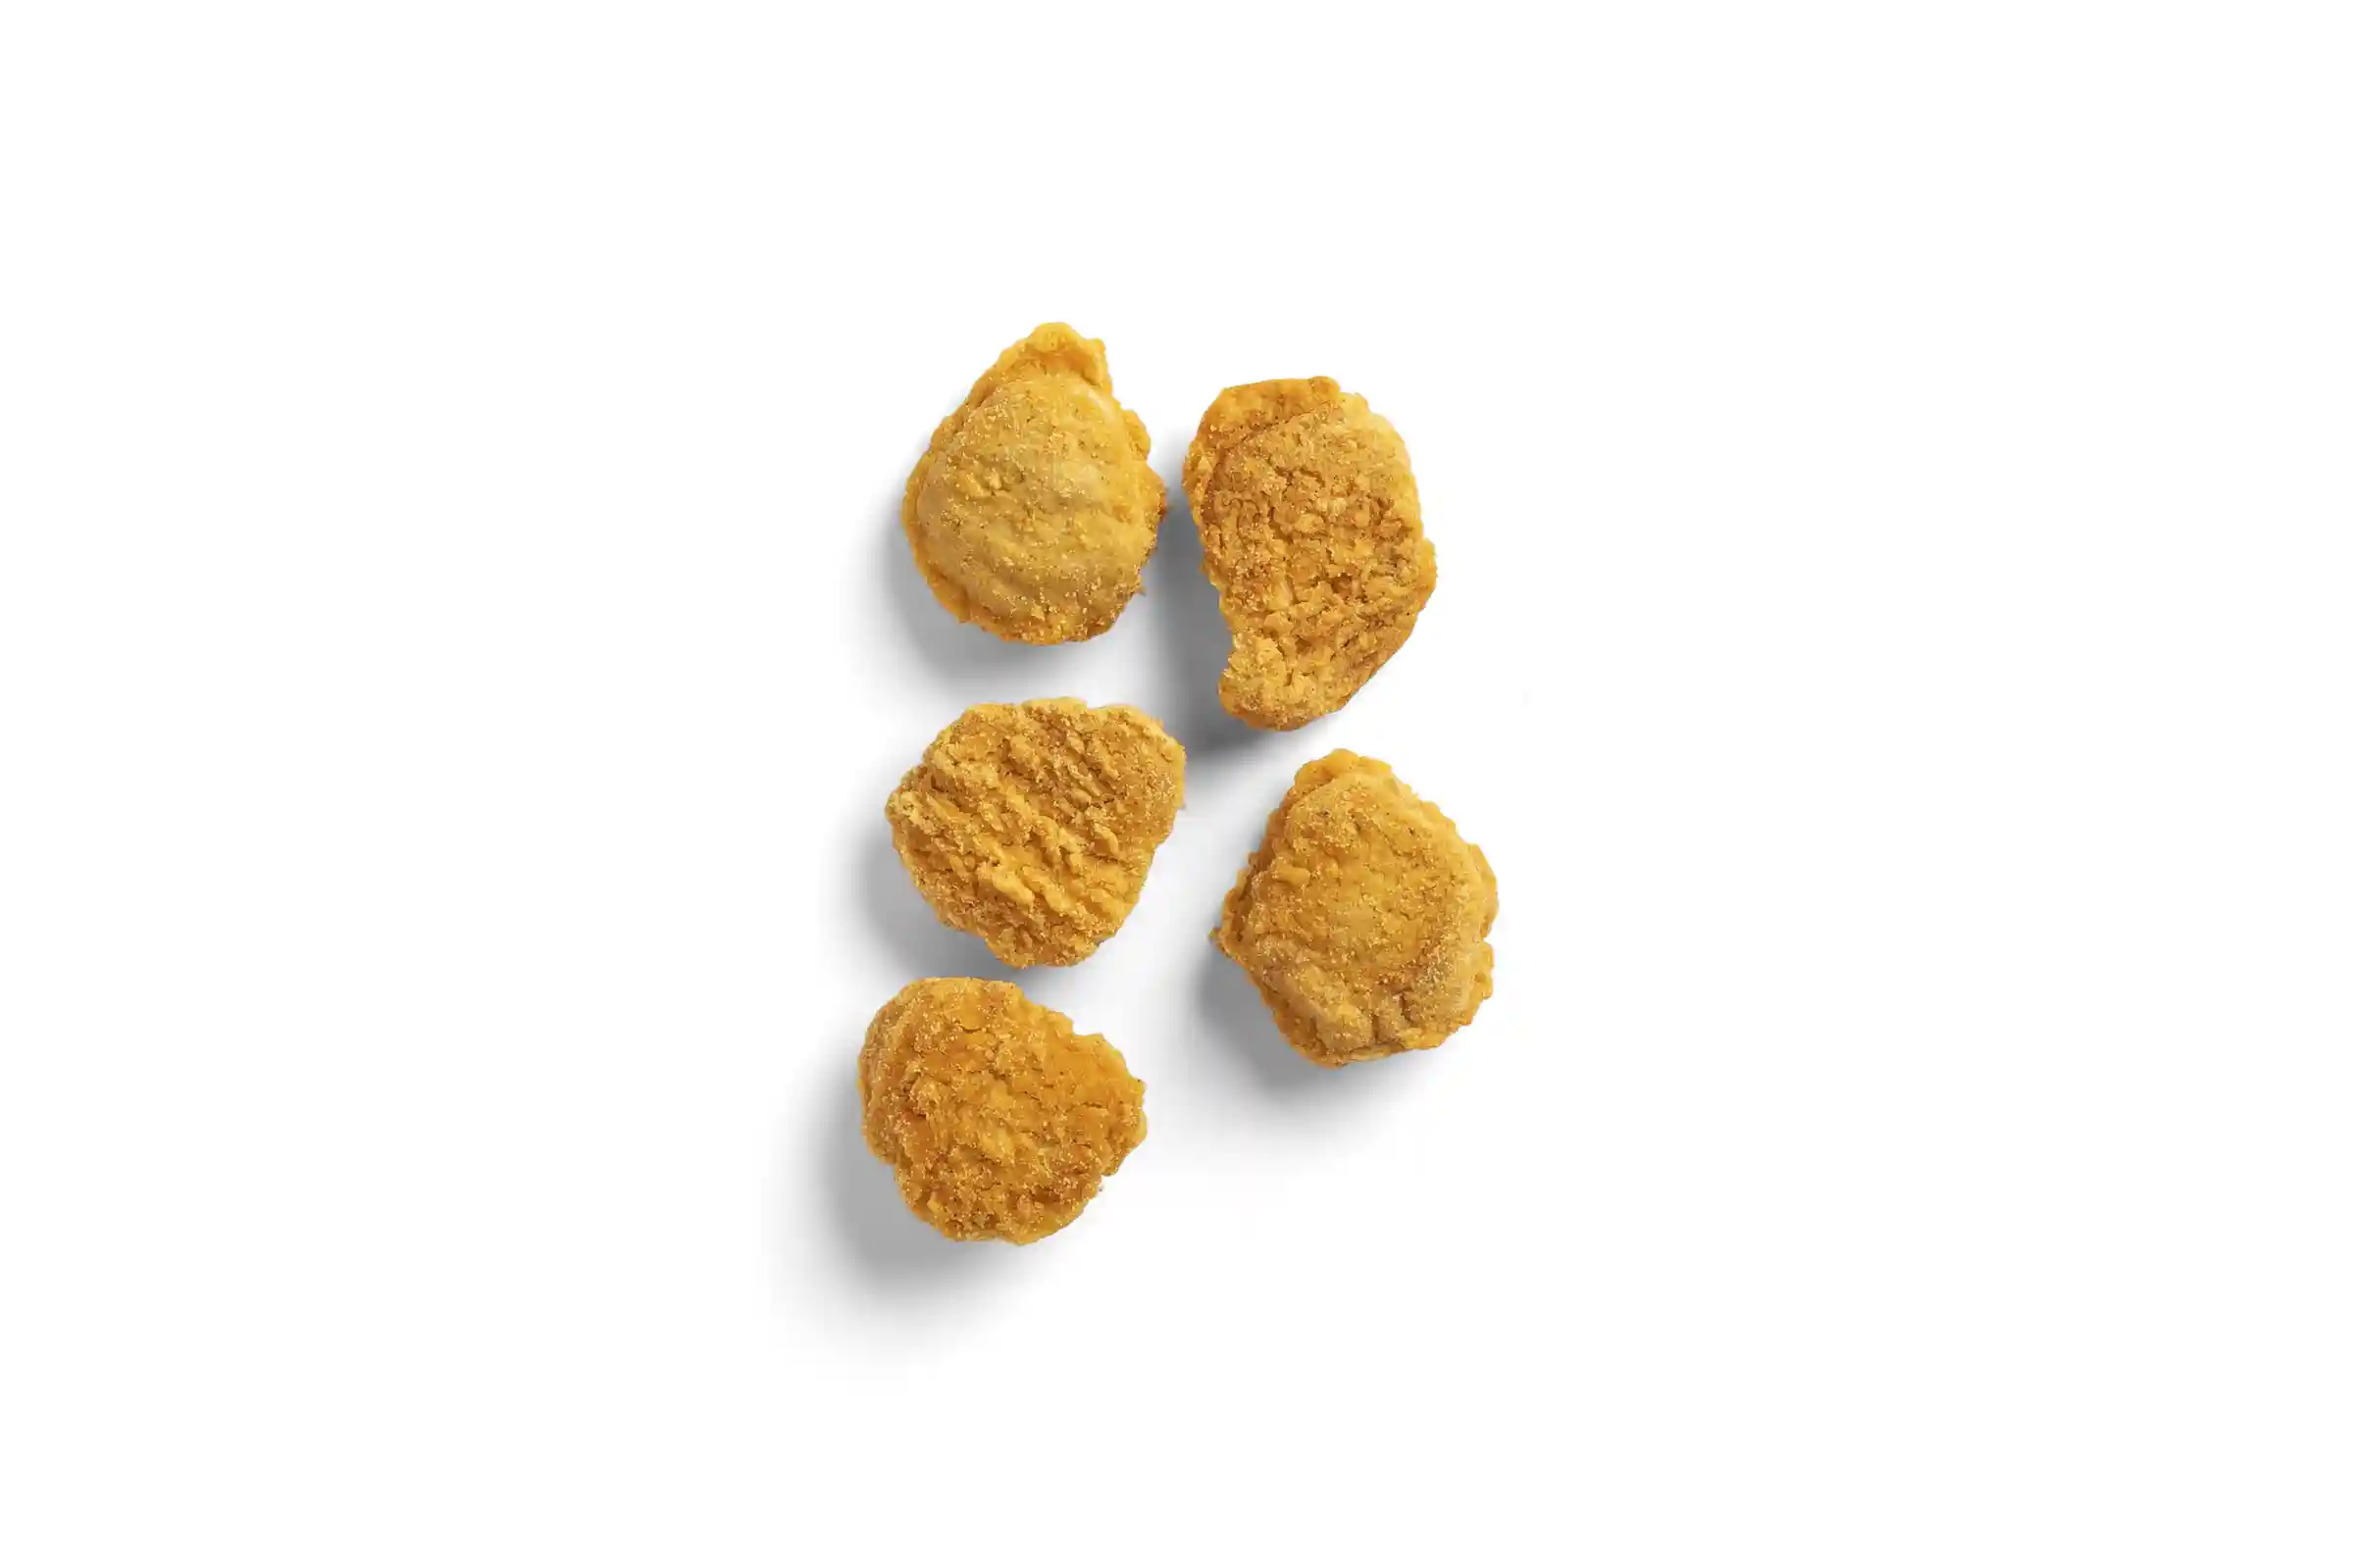 Tyson® Fully Cooked Whole Grain Breaded Chicken Nuggets, CN, 0.79 oz. _image_11